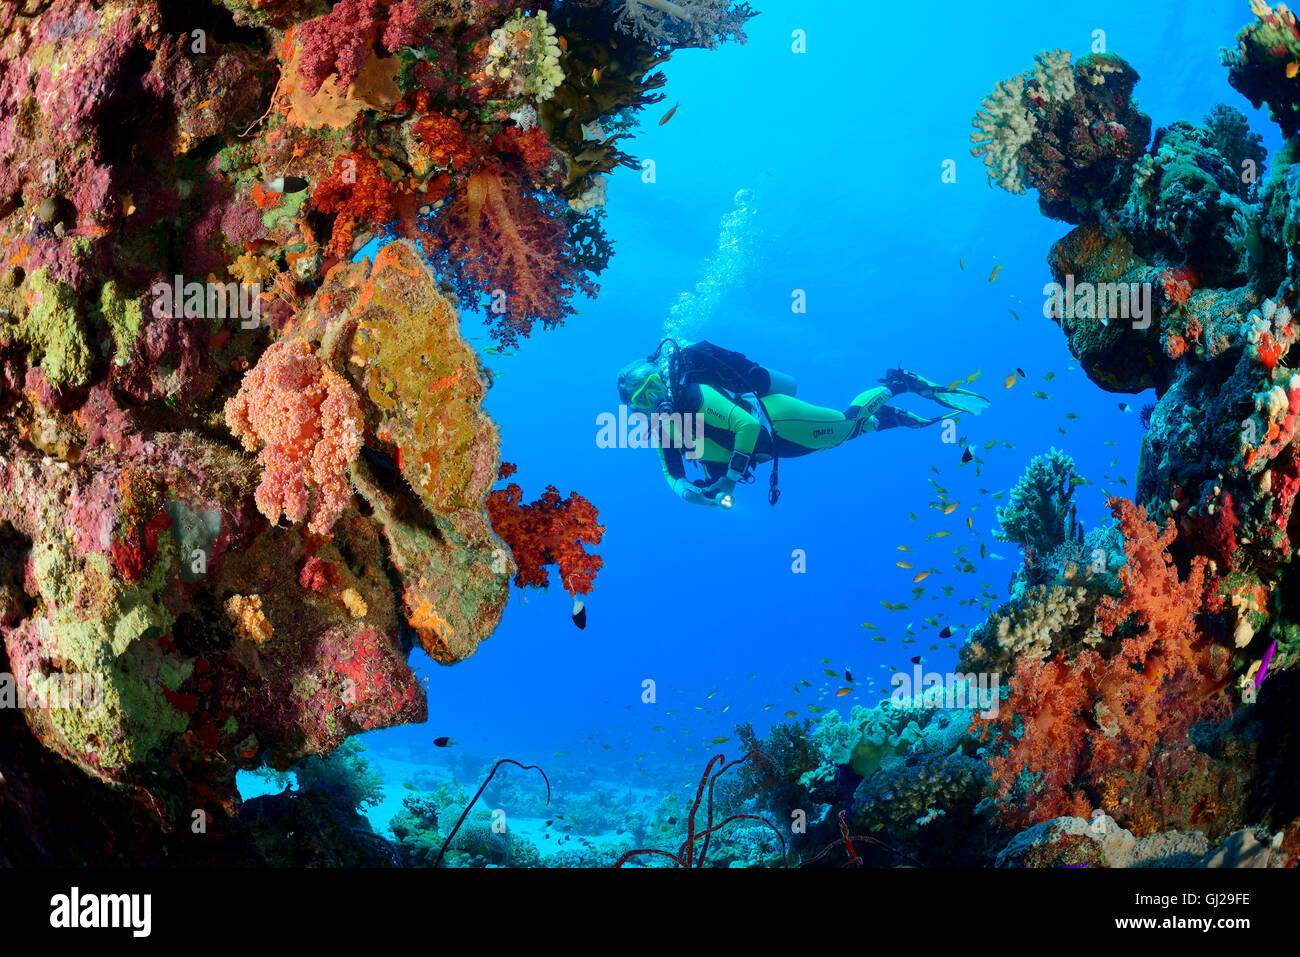 Coral reef with Hemprichs Red Soft Tree Coral and scuba diver, Wadi Gimal, Marsa Alam, Red Sea, Egypt Stock Photo